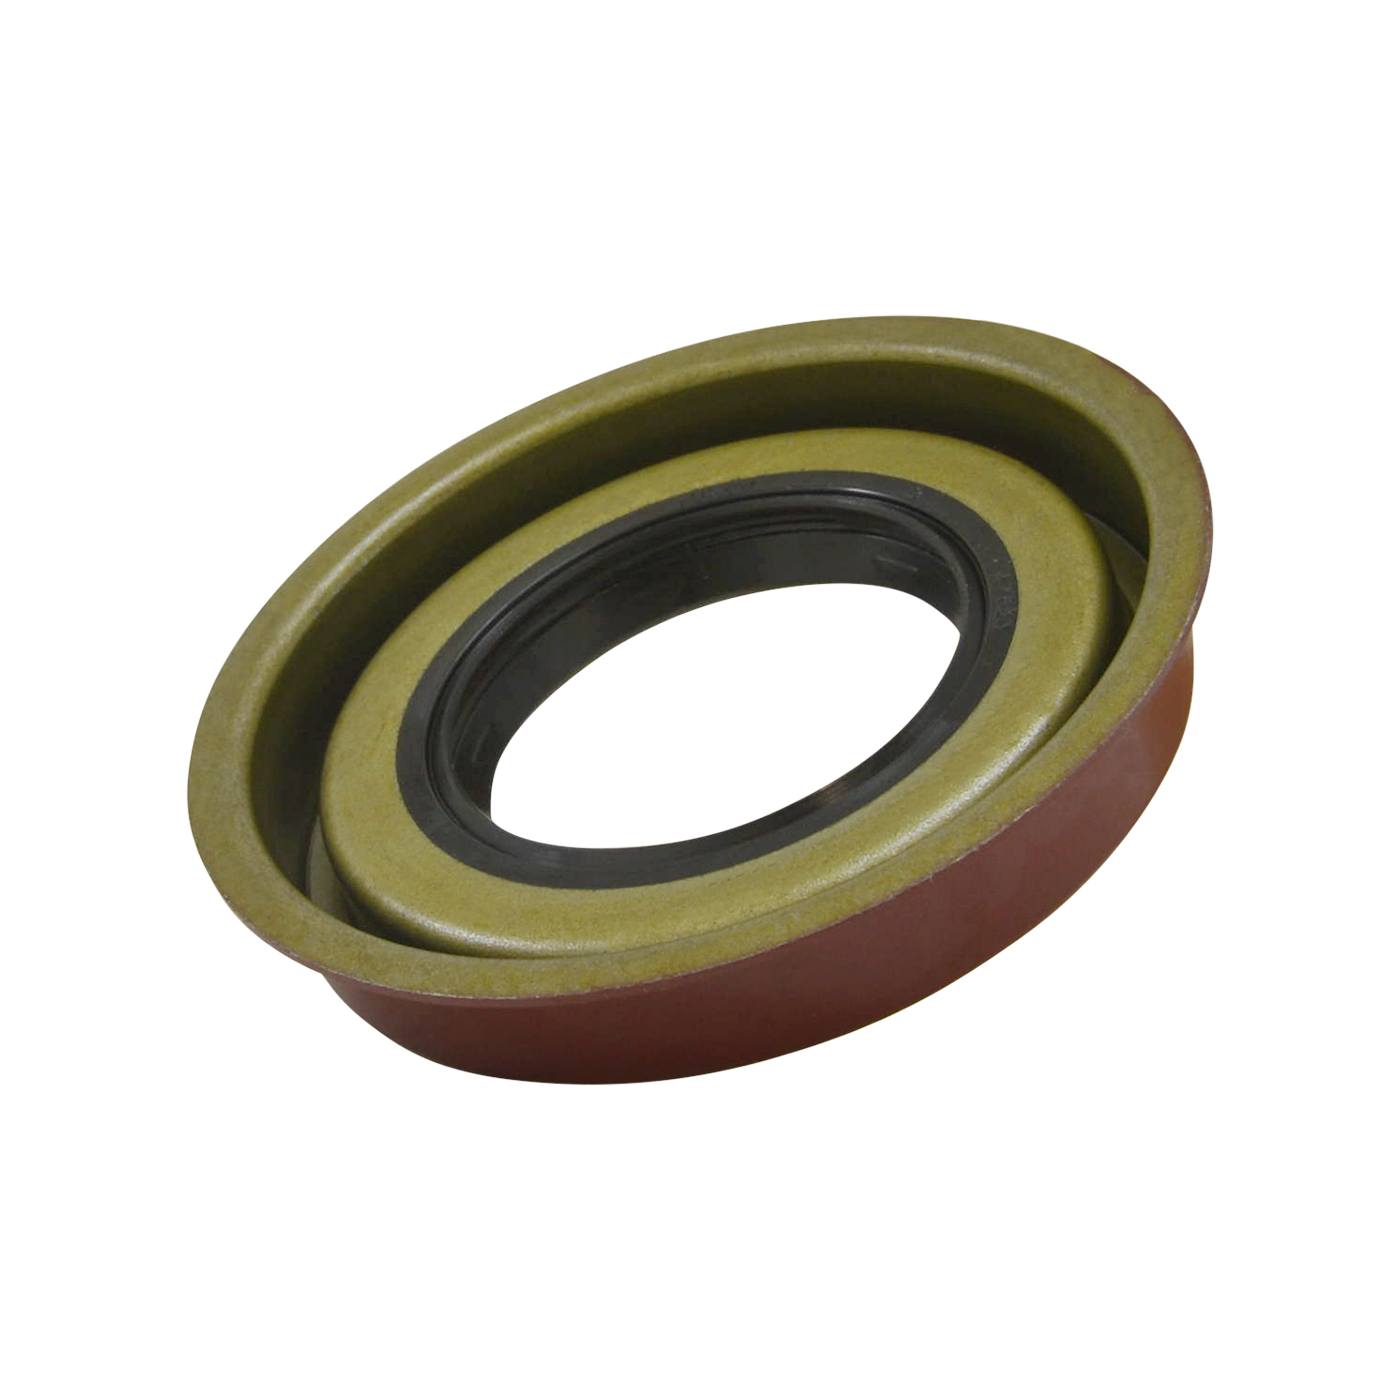 Axle seal for '88 and newer GM 8.5" Chevy C10 